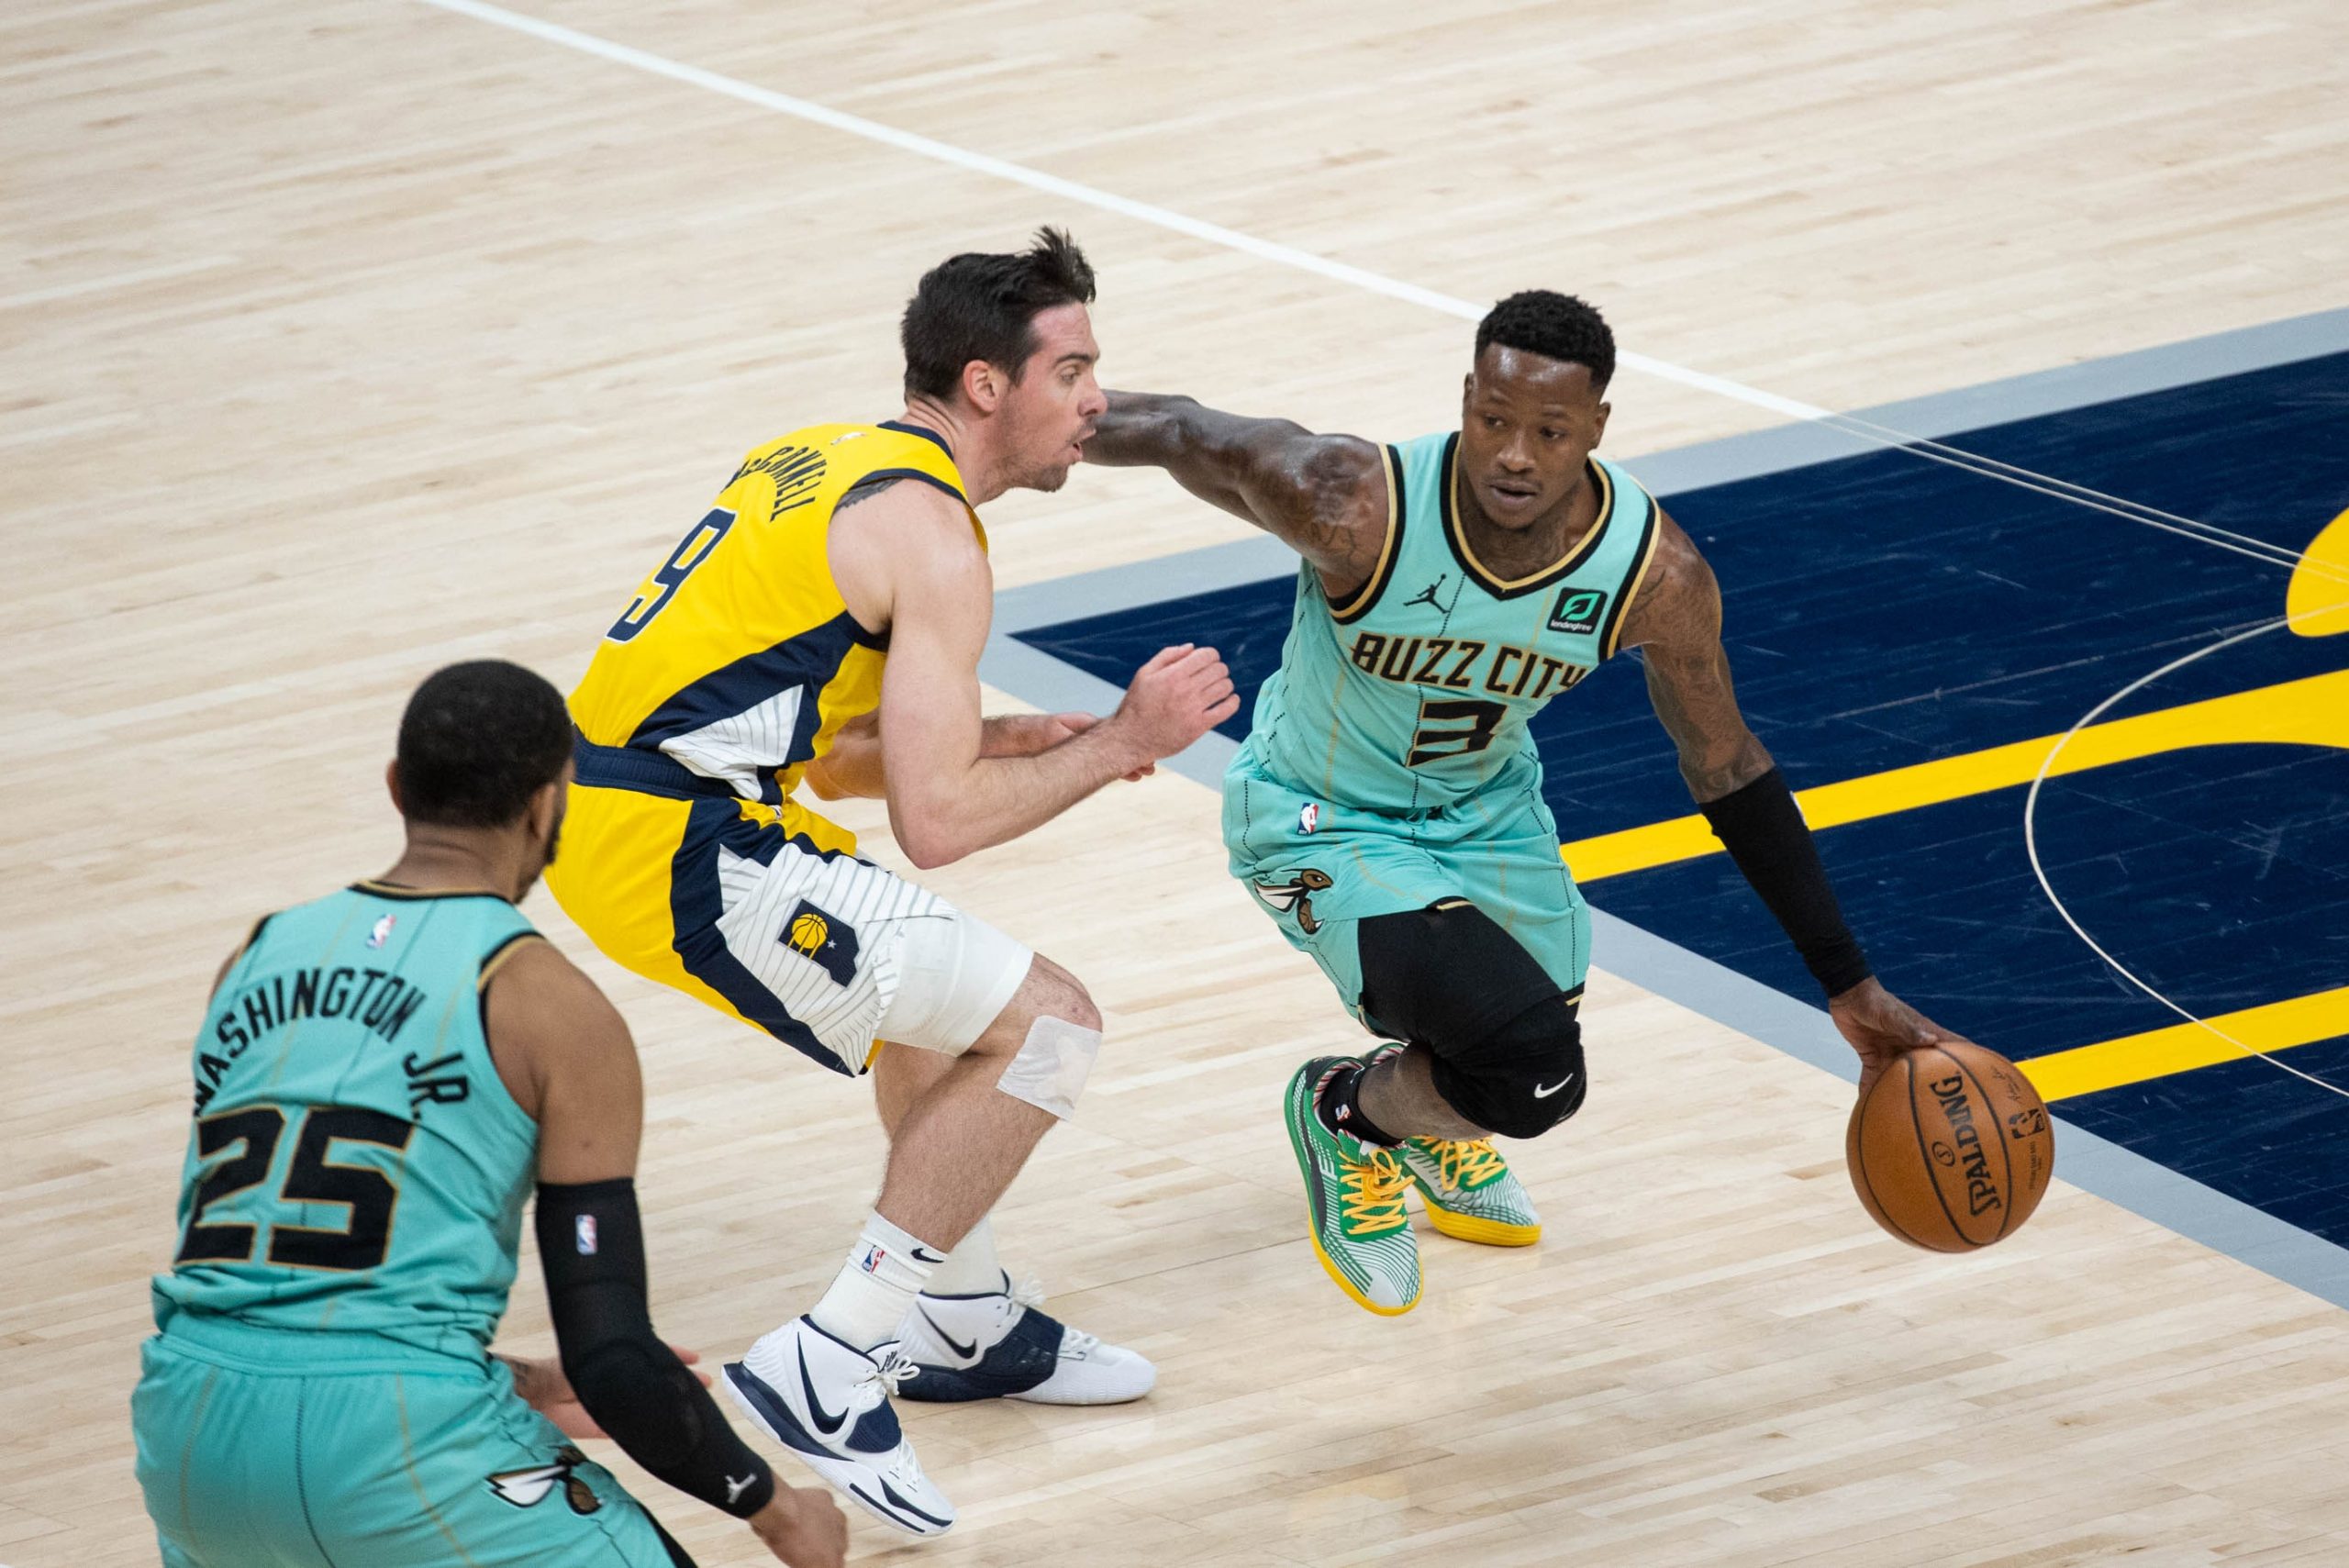 Charlotte Hornets guard Terry Rozier (3) dribbles the ball while Indiana Pacers guard T.J. McConnell (9) defends in the fourth quarter at Bankers Life Fieldhouse.